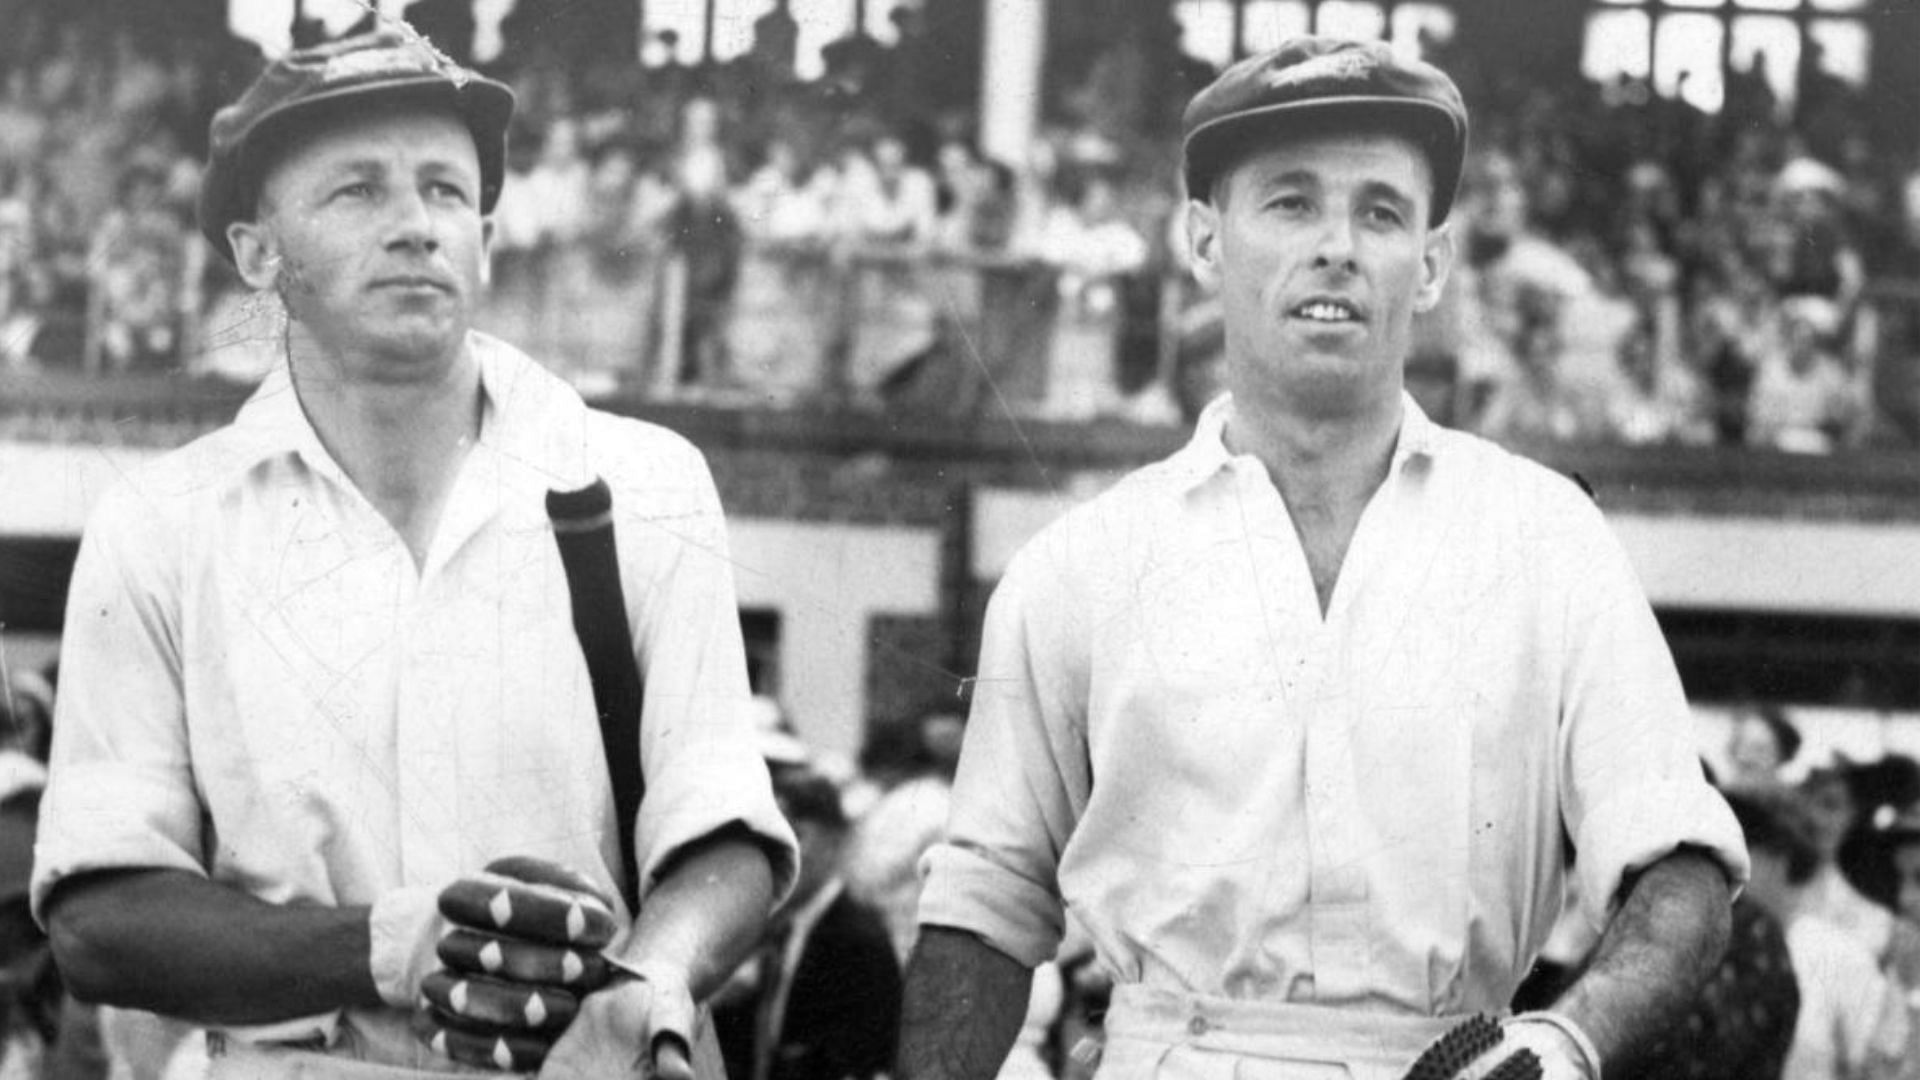 Bradman and Fingleton walking out to bat in a Test match.